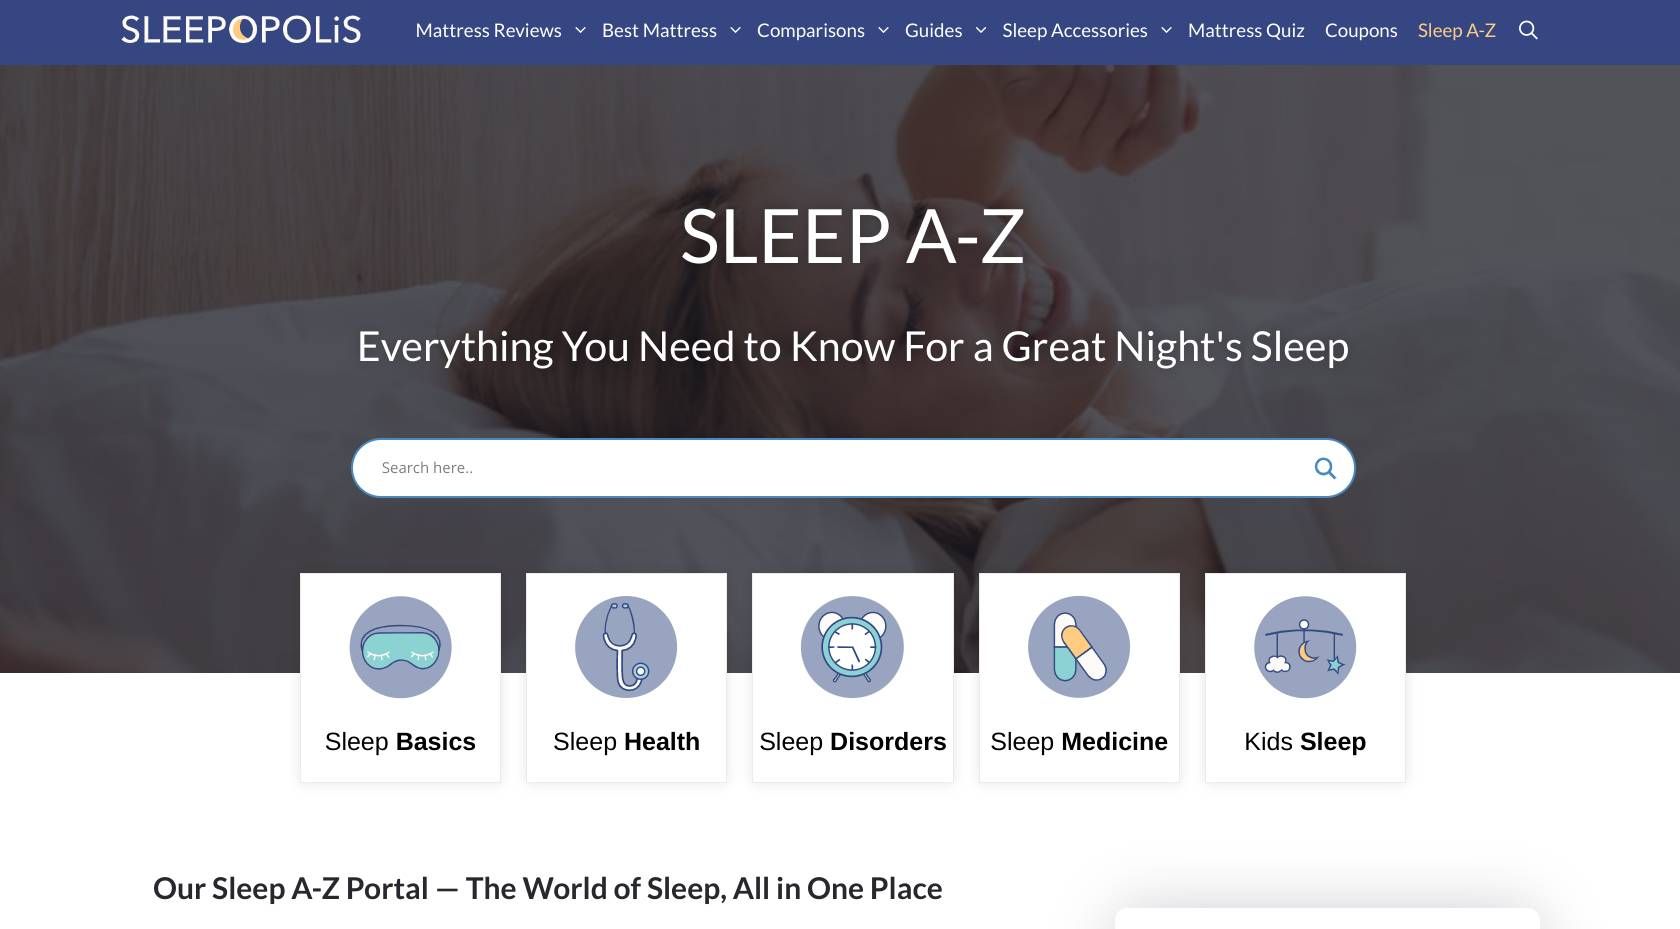 Sleepopolis educates the reader about facts on sleep and busts myths about how we rest, along with giving a cool 30-day challenge to change your sleep habits